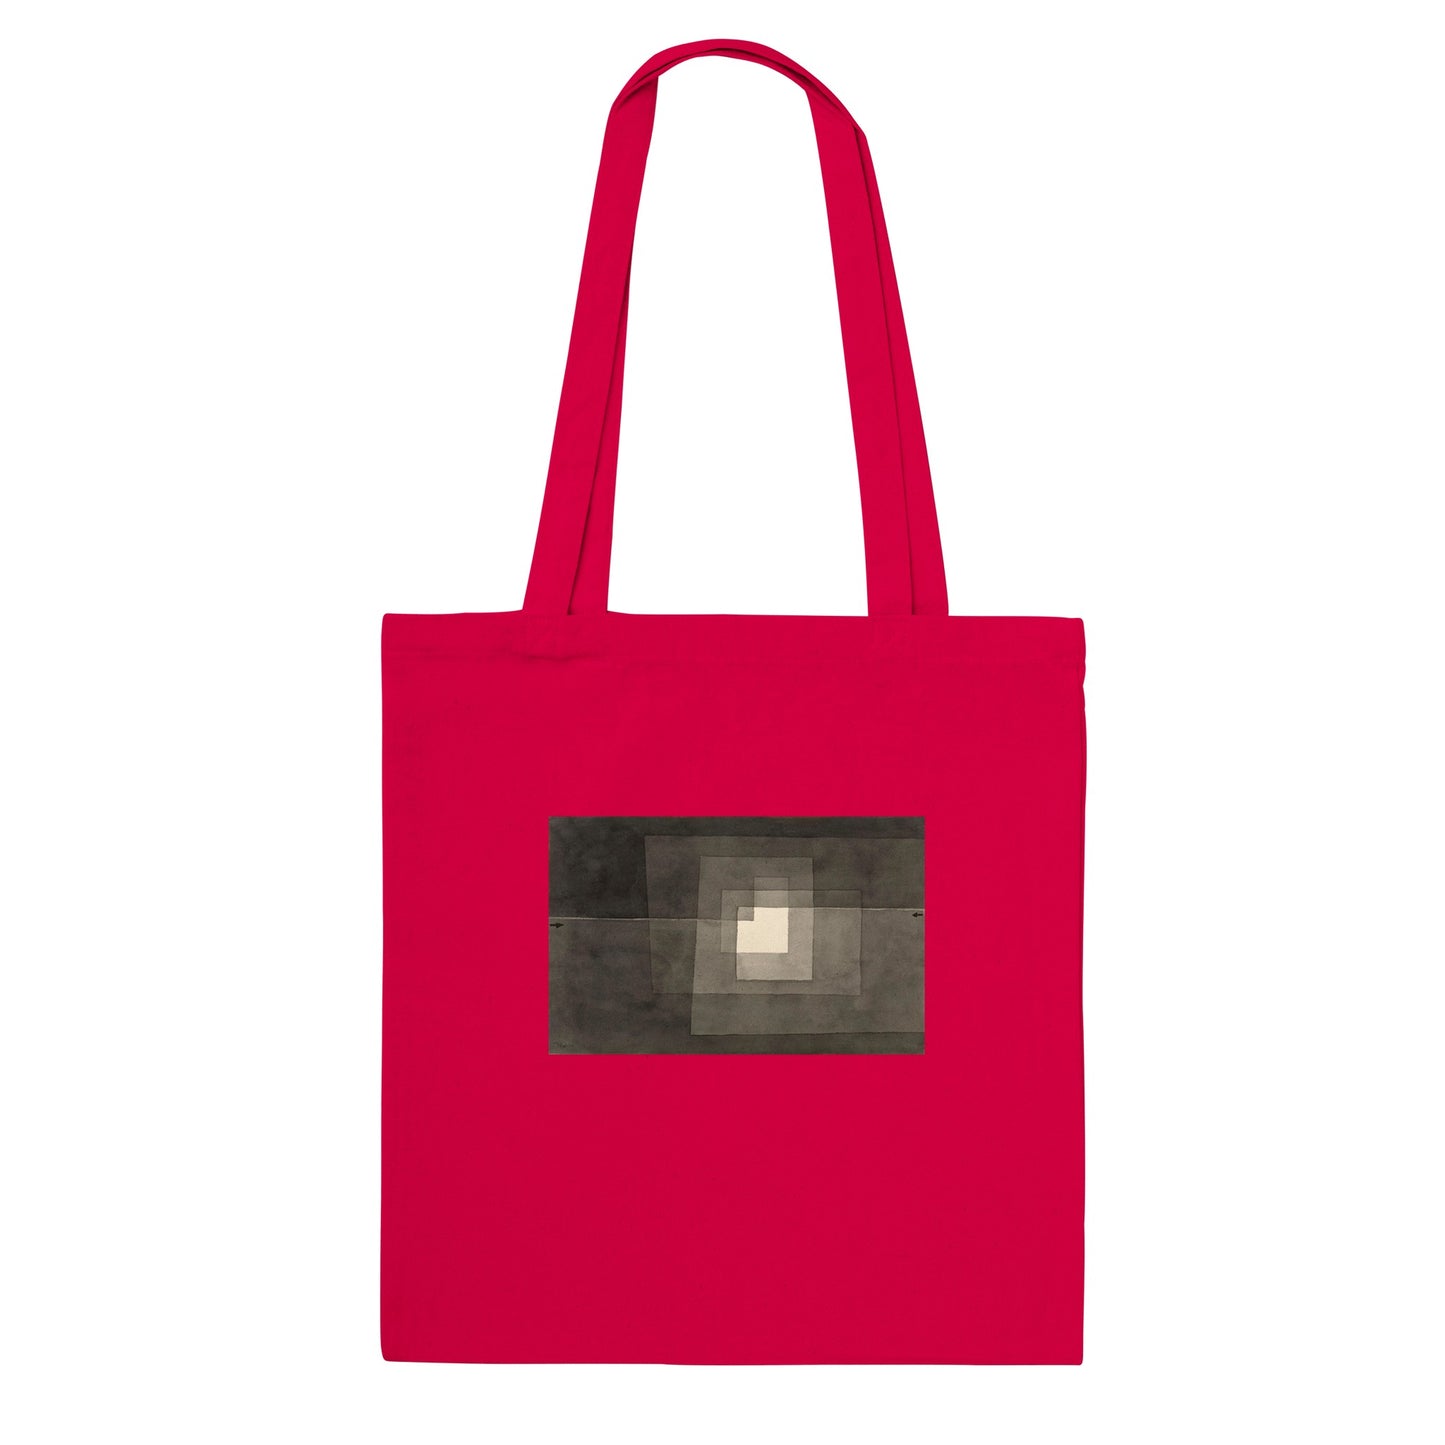 PAUL KLEE - TWO WAYS (1932) - CLASSIC TOTE BAG